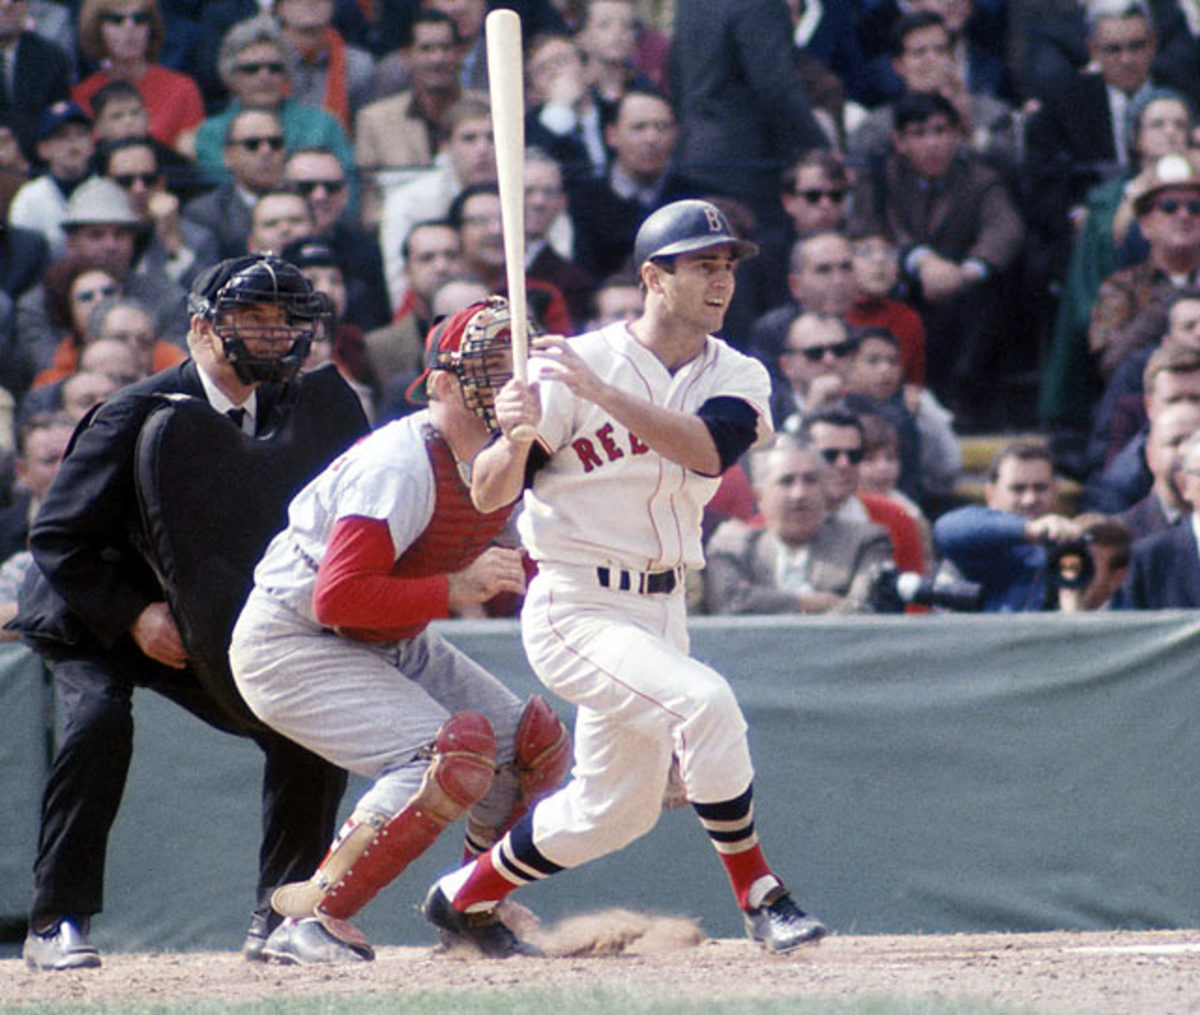 "The Impossible Dream" 1967 AL pennant